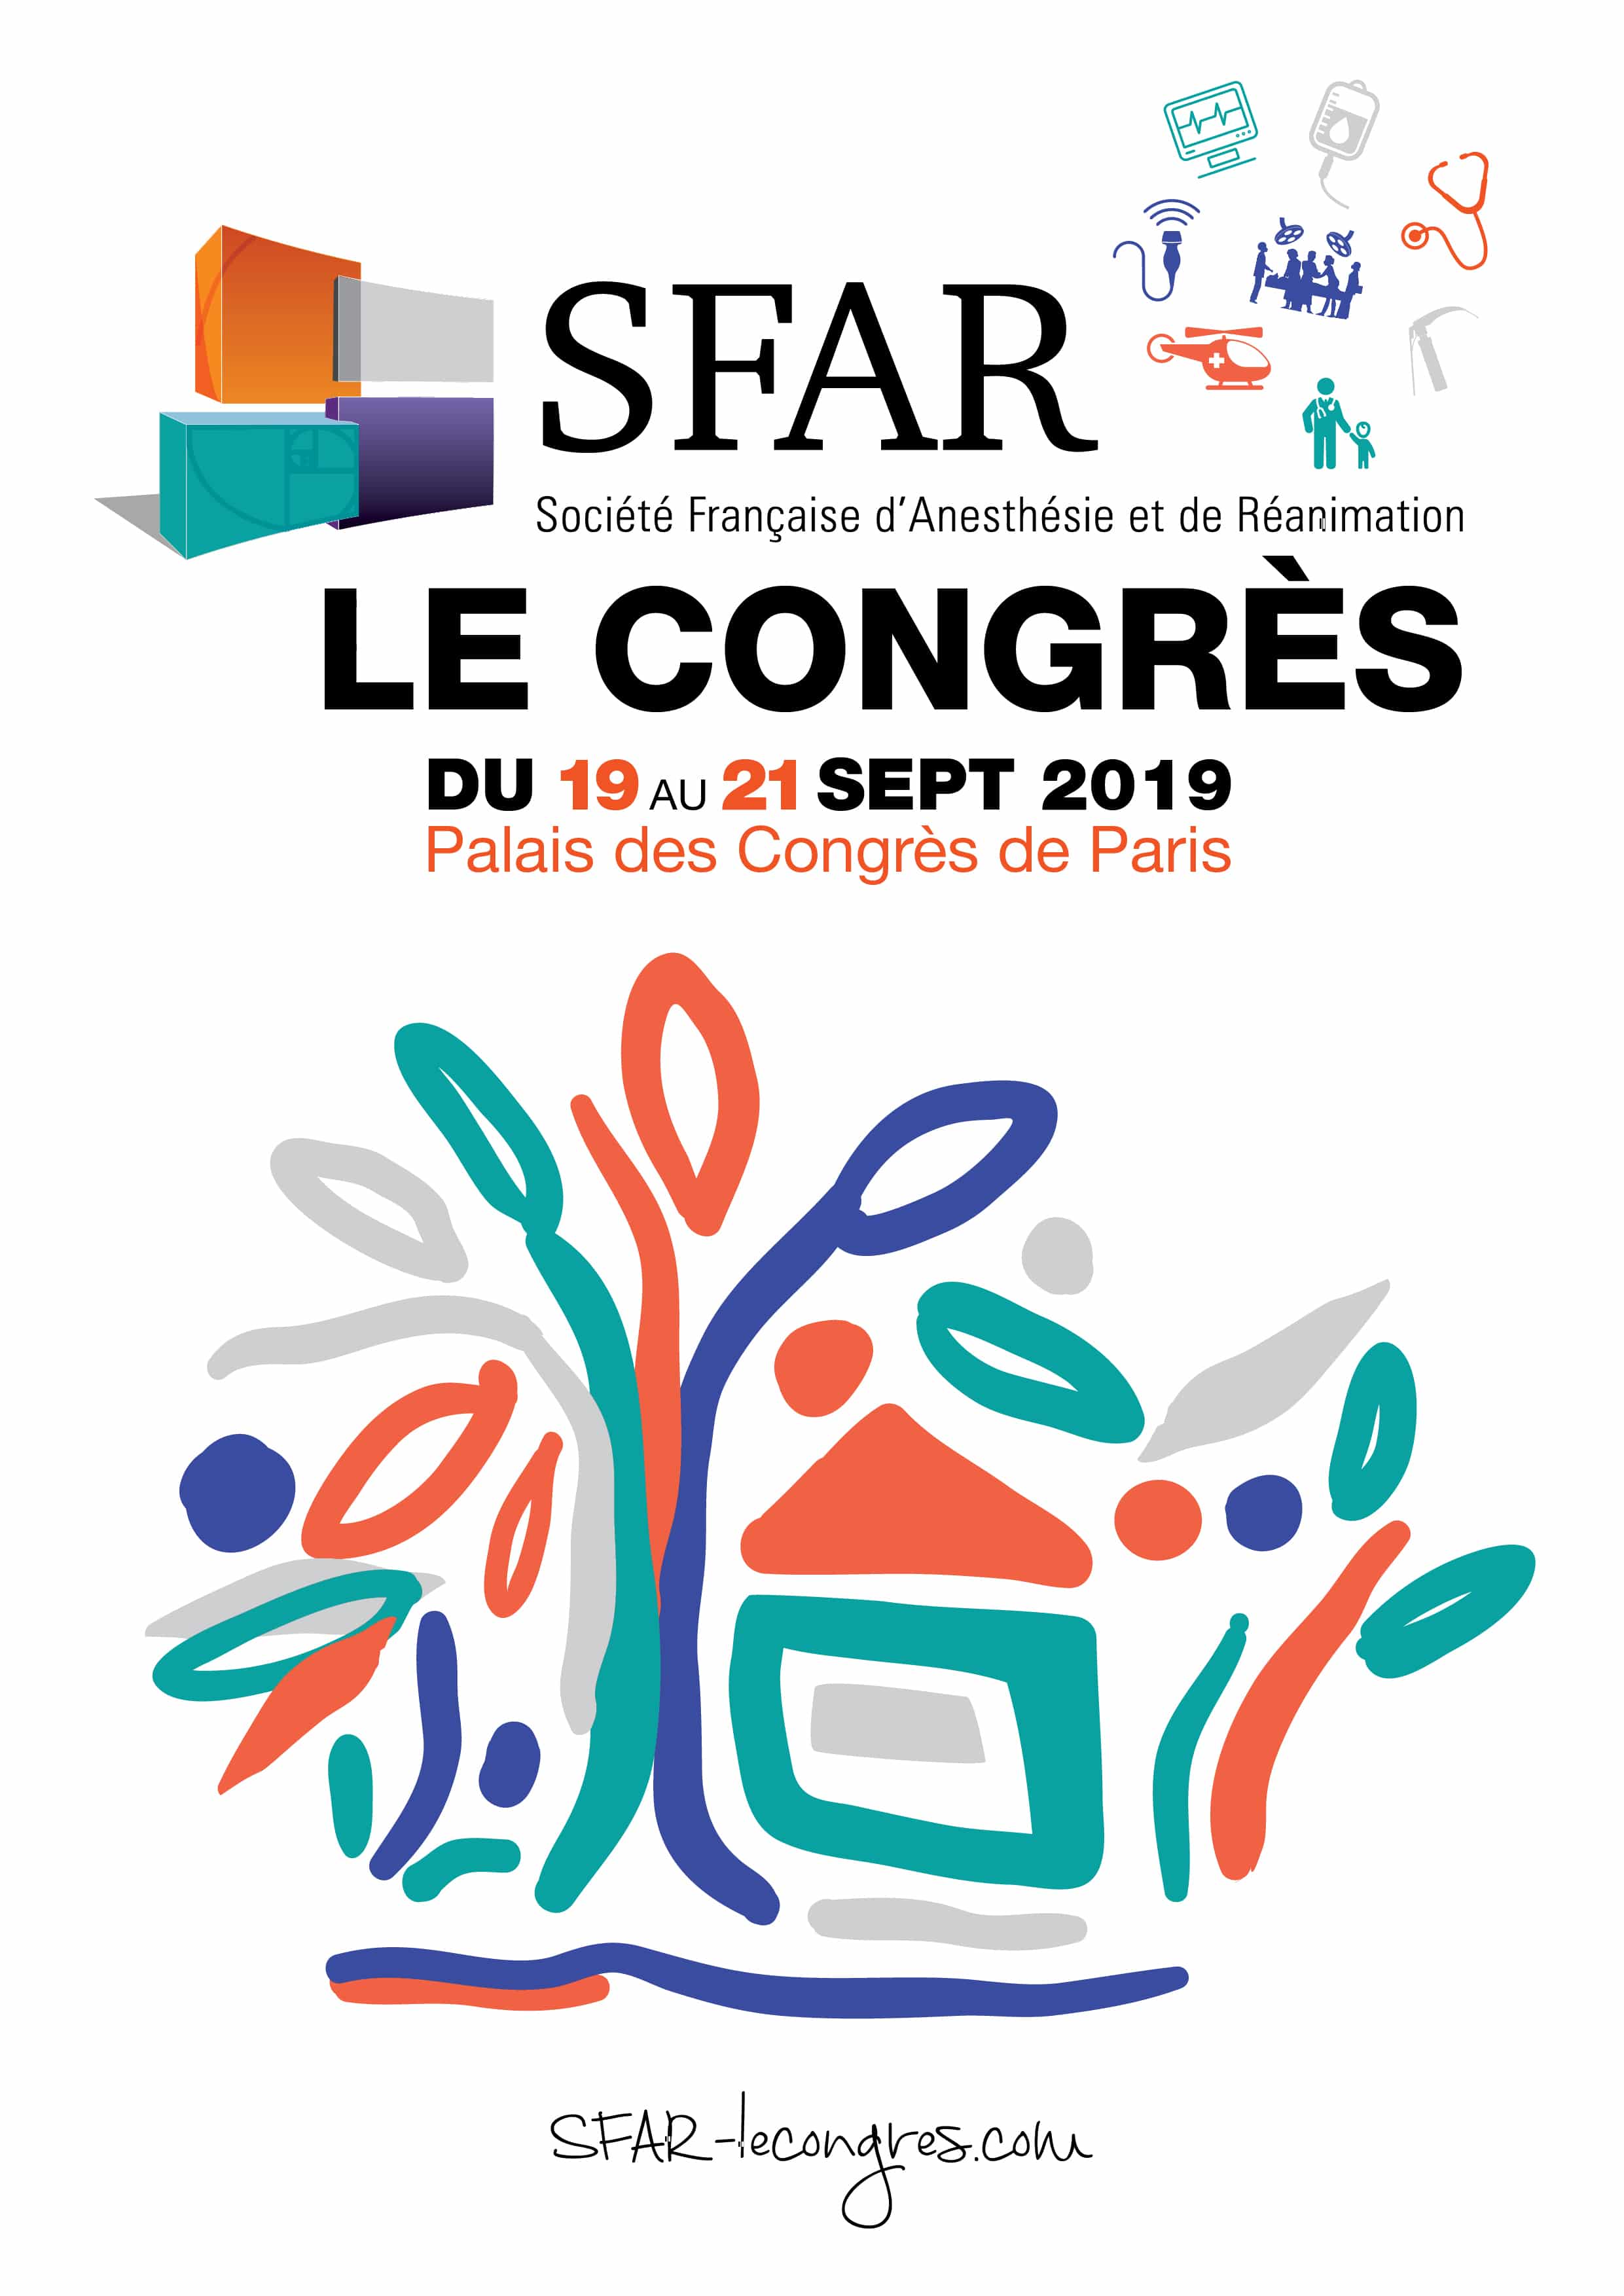 Congress of the French Society of Anesthesia and Resuscitation SFAR 2019